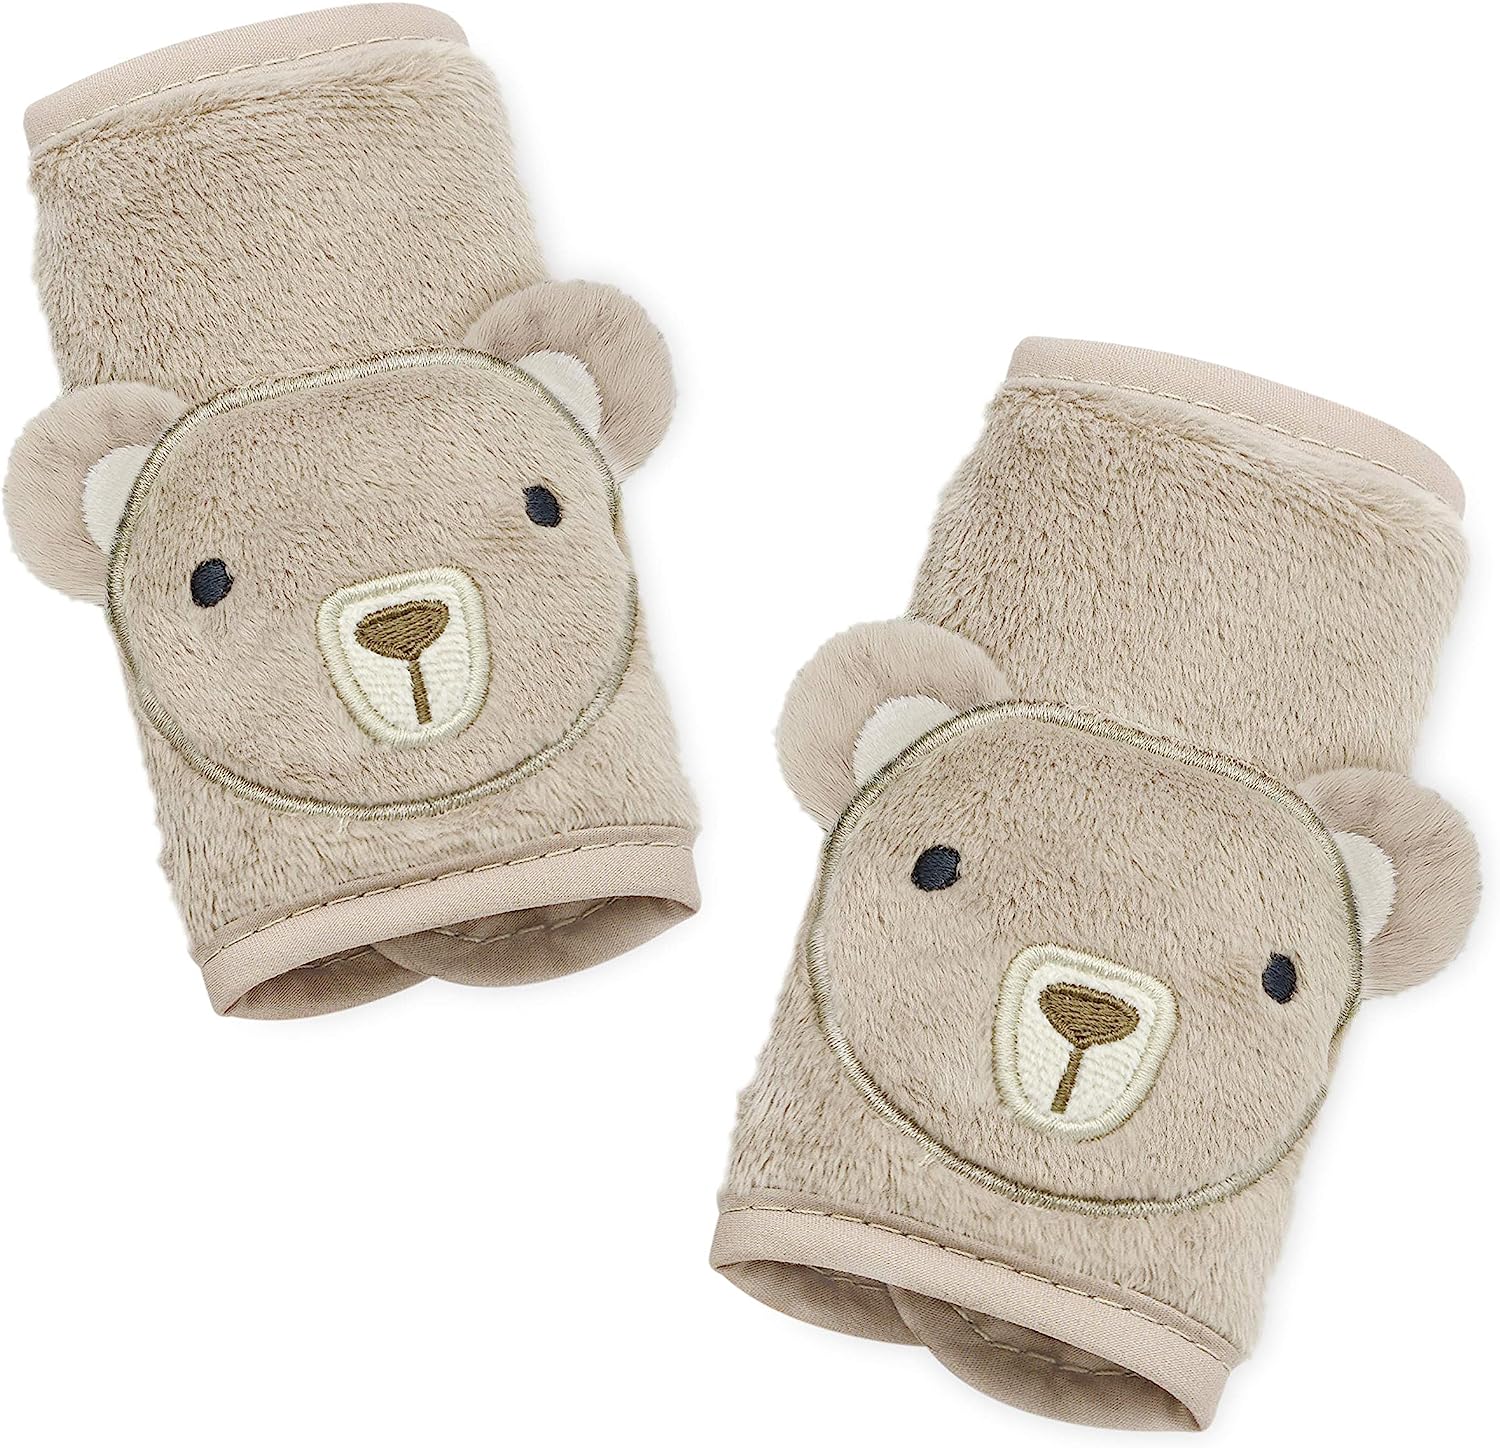 Travel Bug Bear Head Support Strap Cover Set